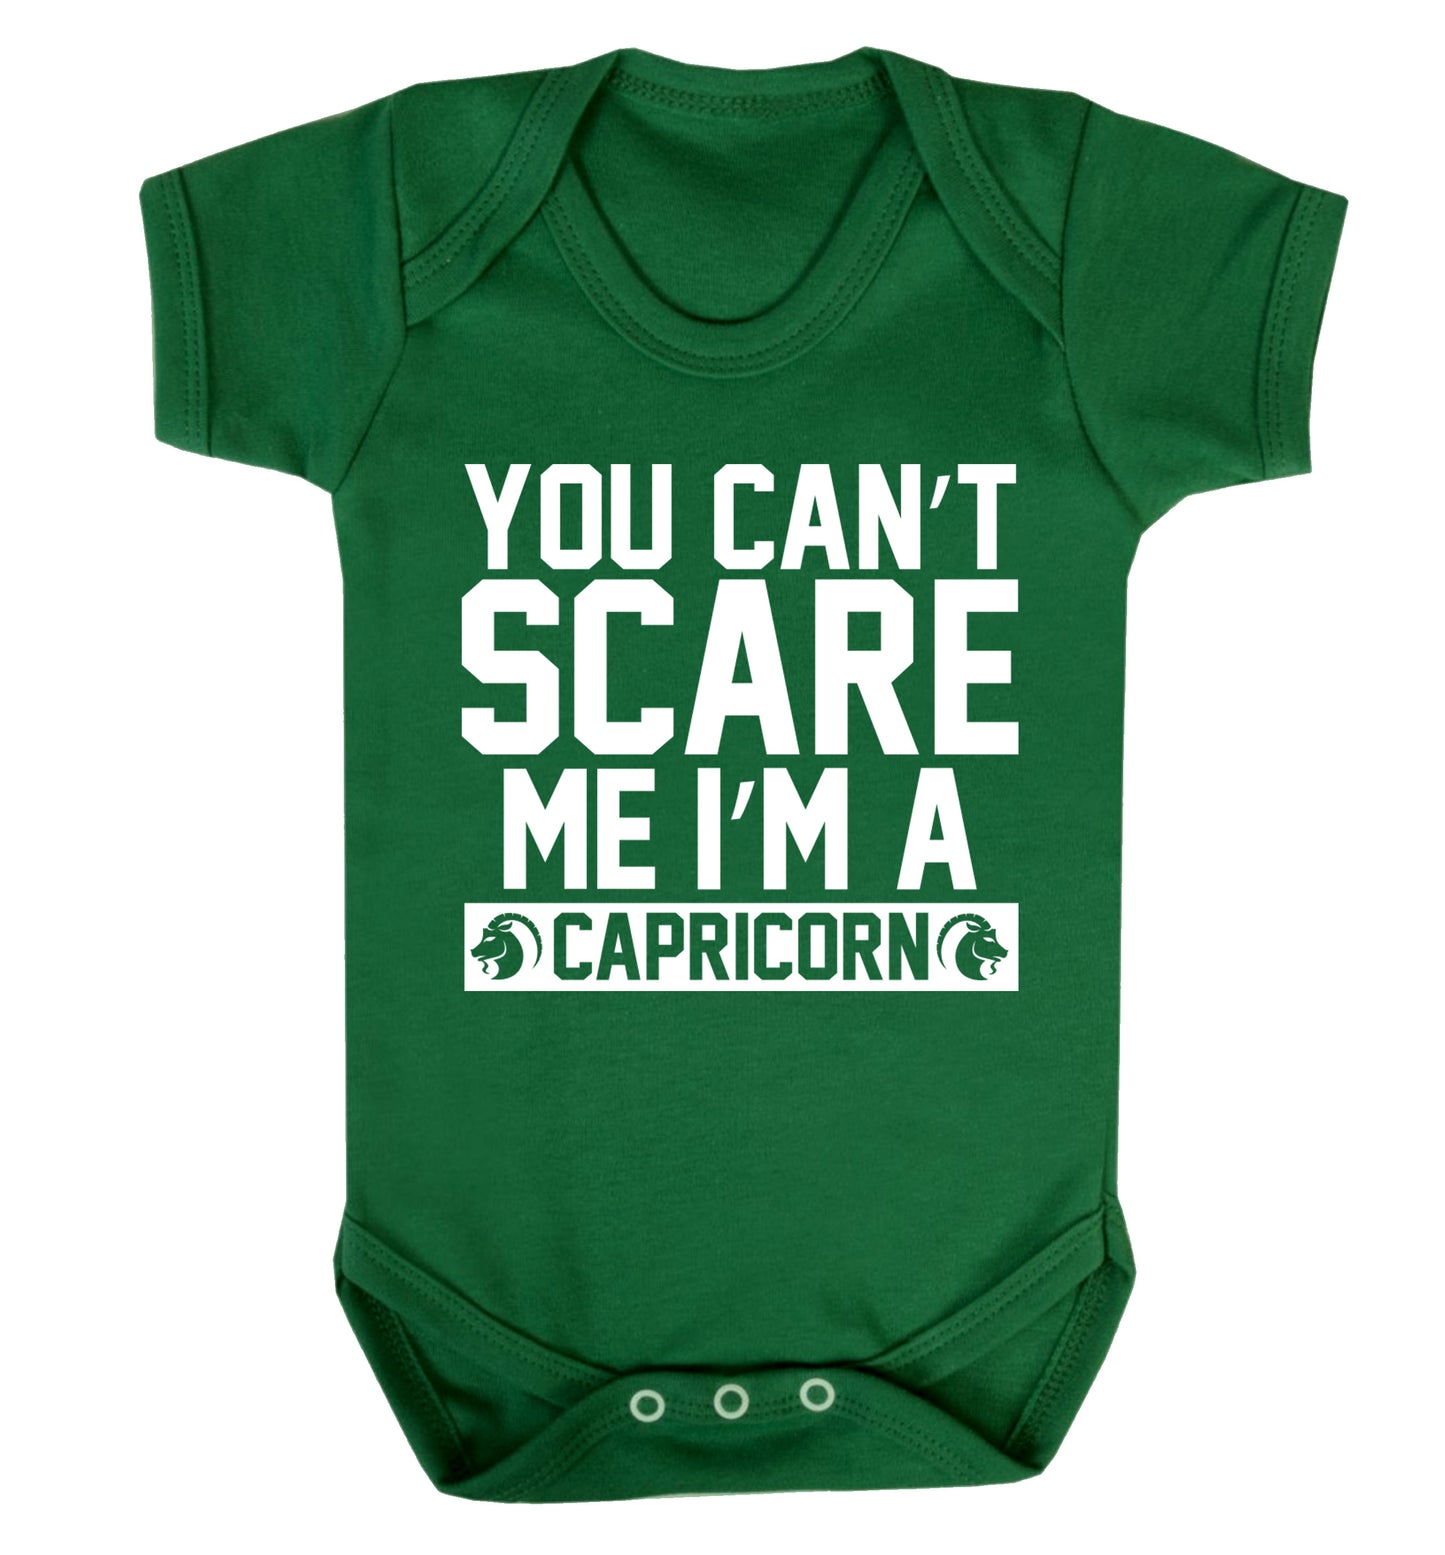 You can't scare me I'm a capricorn Baby Vest green 18-24 months